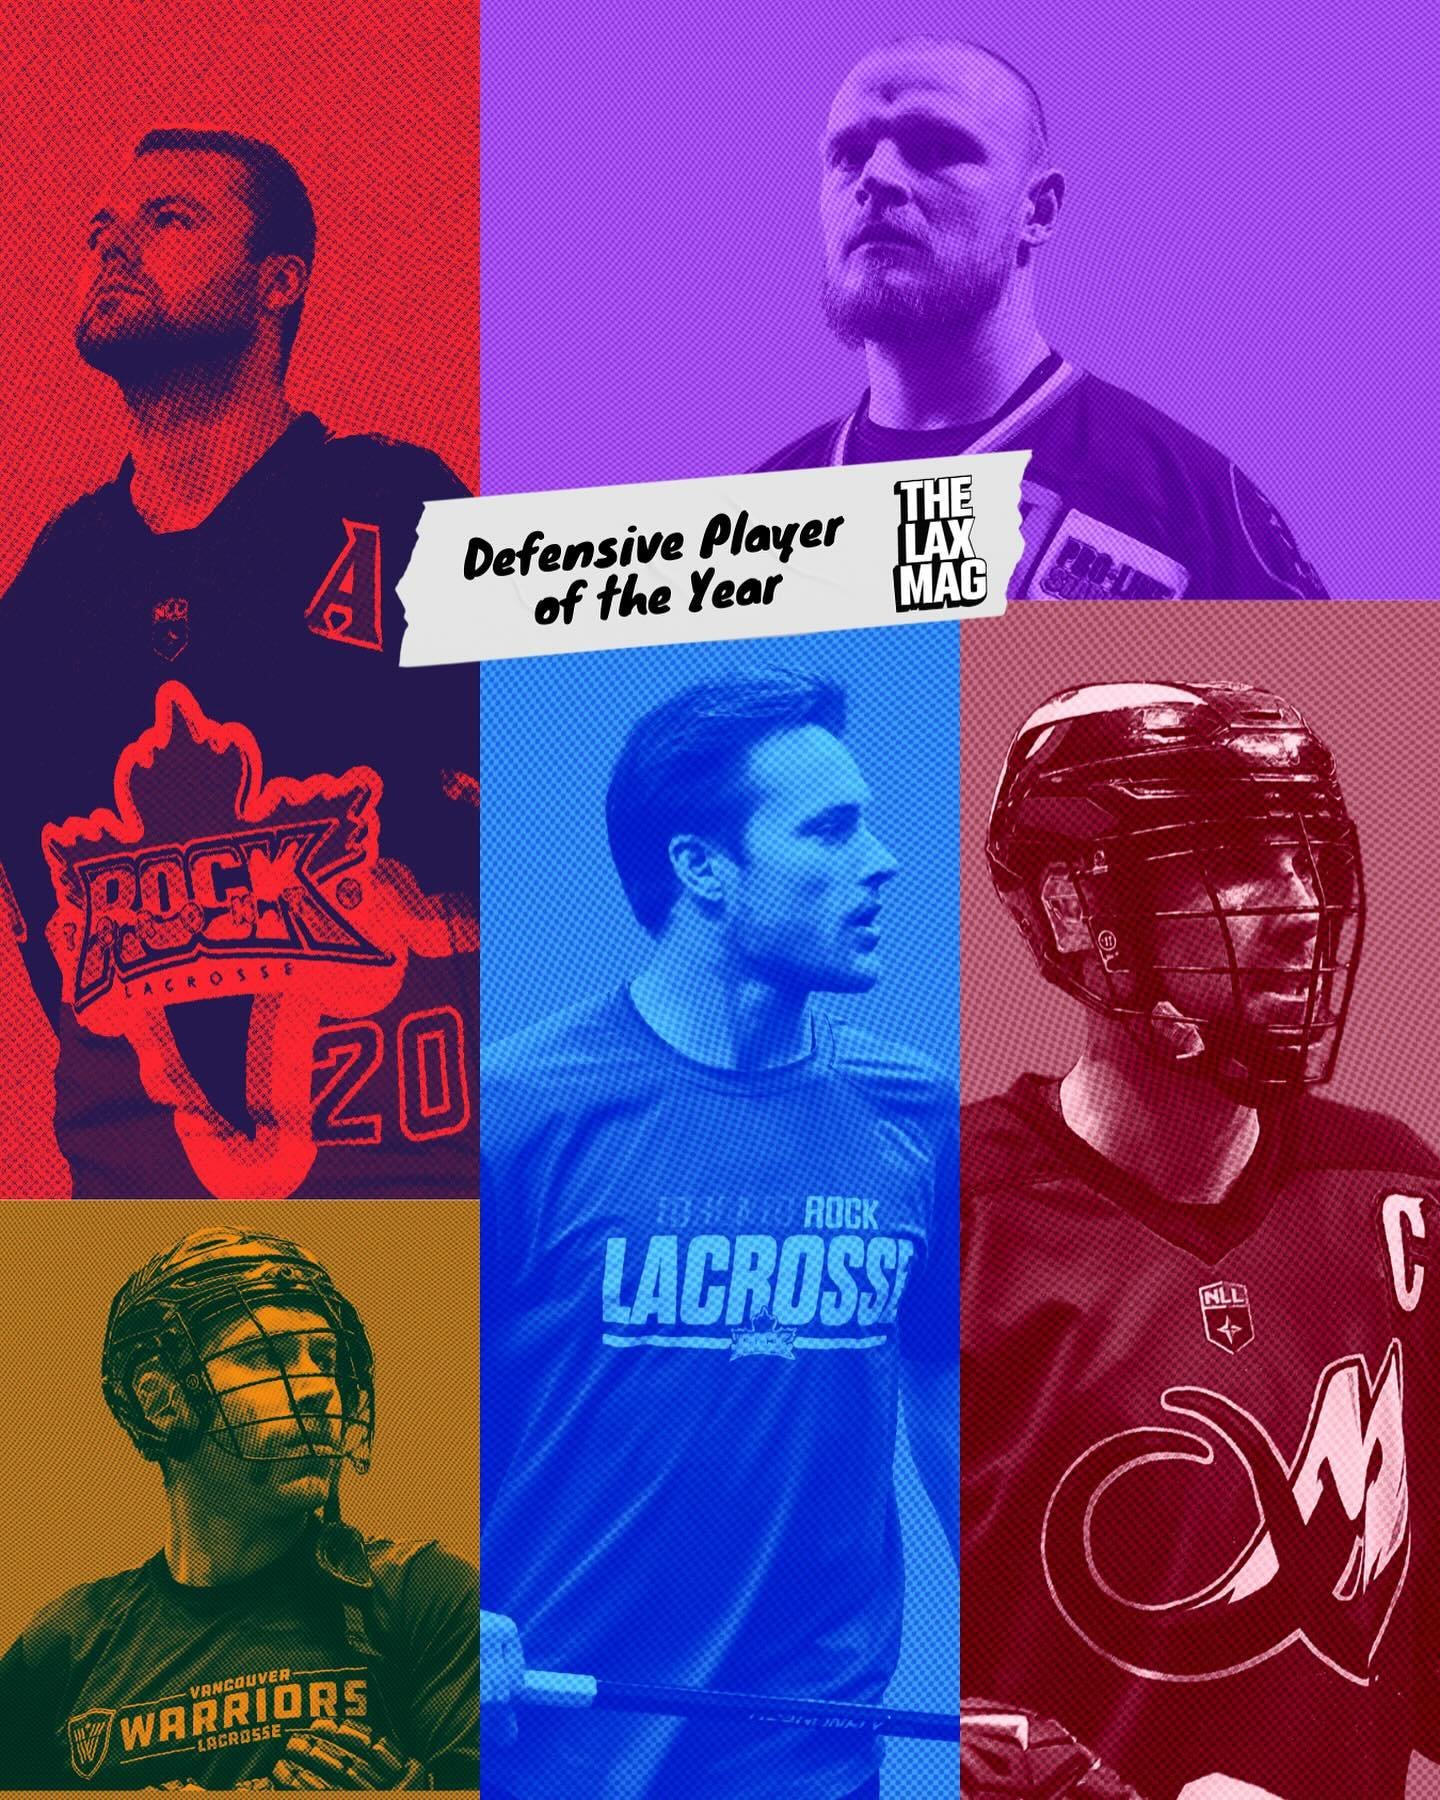 Since 2012, only six players from four different franchises have been voted the NLL&rsquo;s Defensive Player of the Year, never an easy award for a newcomer to nail down.
&nbsp;
Who&rsquo;ll win this year?
&nbsp;
Hit the link in our bio to see The La